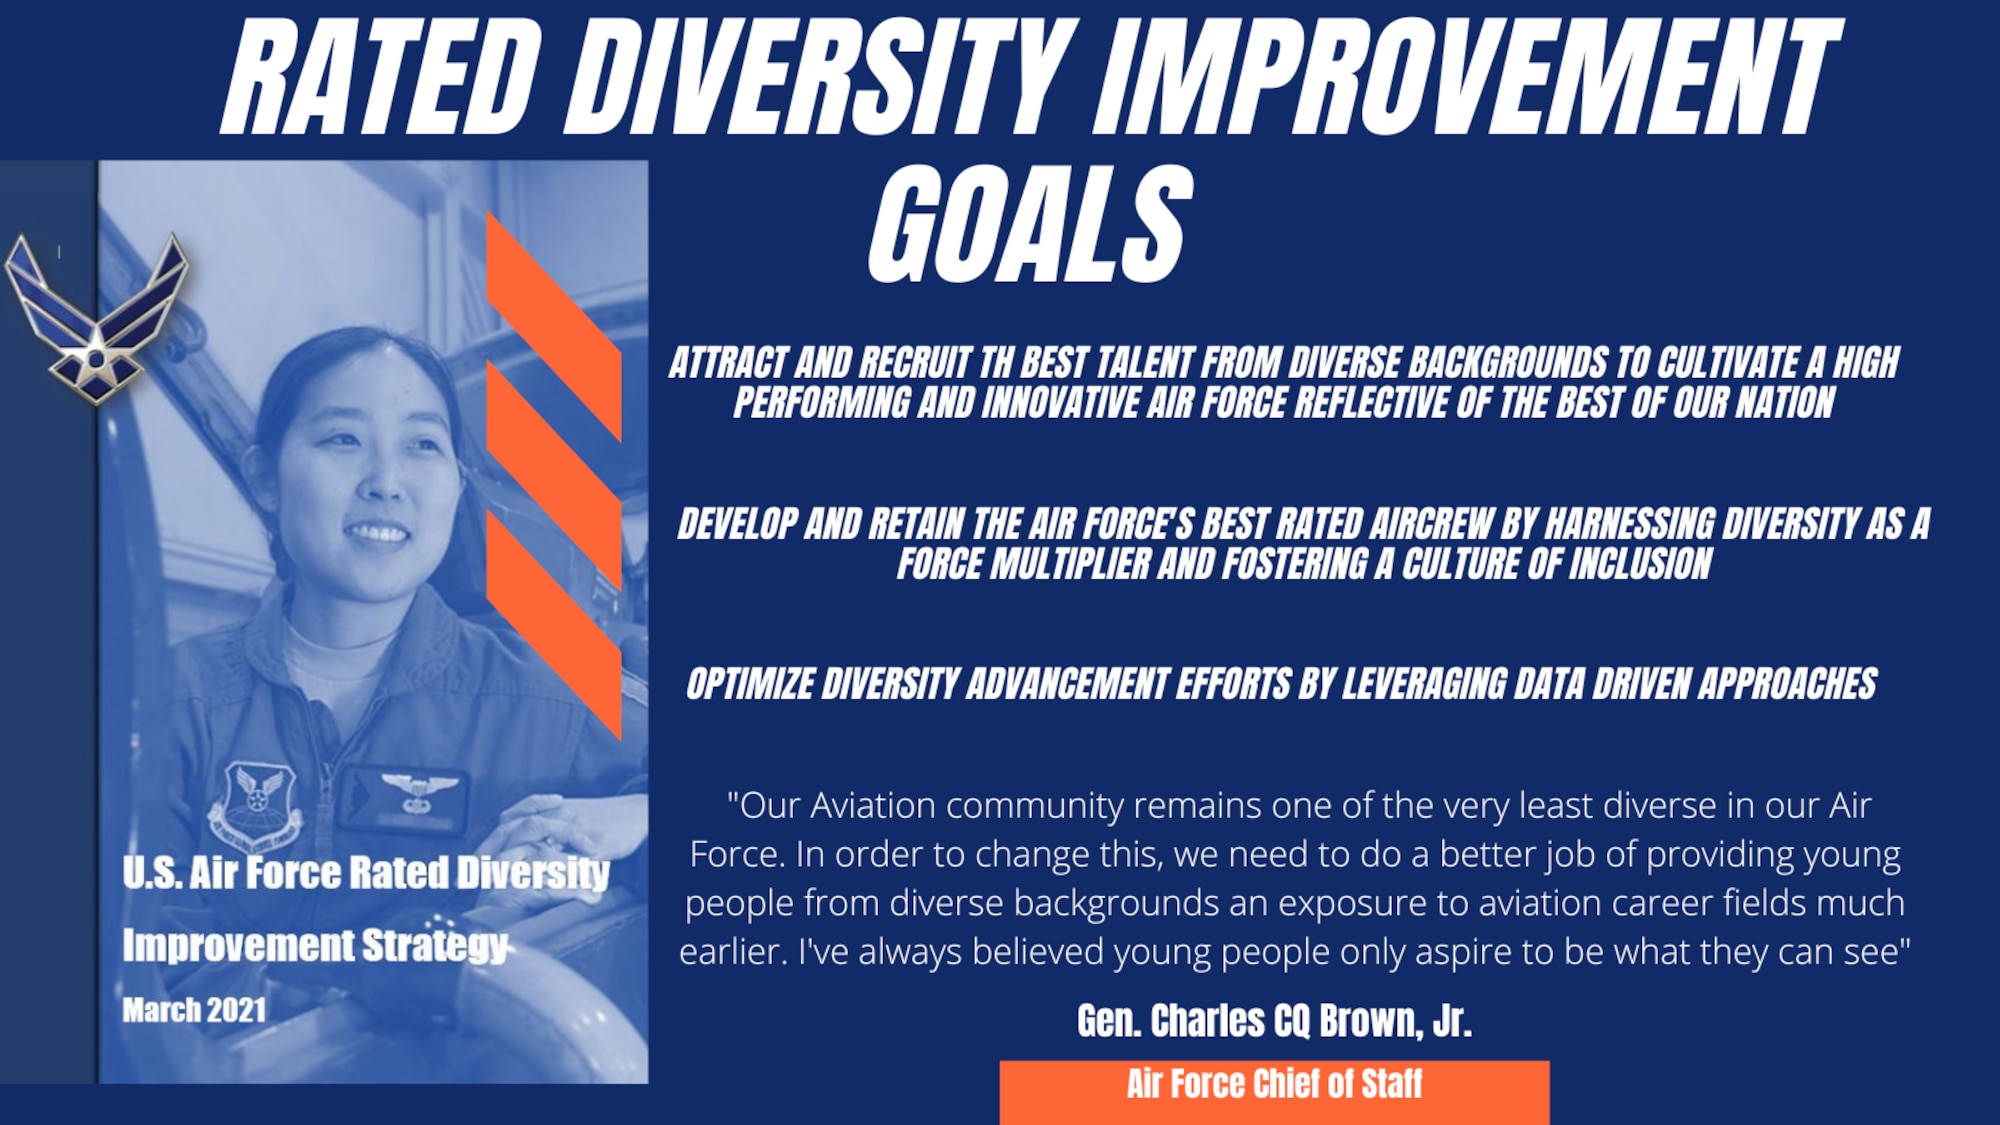 graphic depicting the rated diversity improvement strategy and the three goals along with a quote from Gen. Charles CQ Brown, Jr., Chief of staff of the Air Force